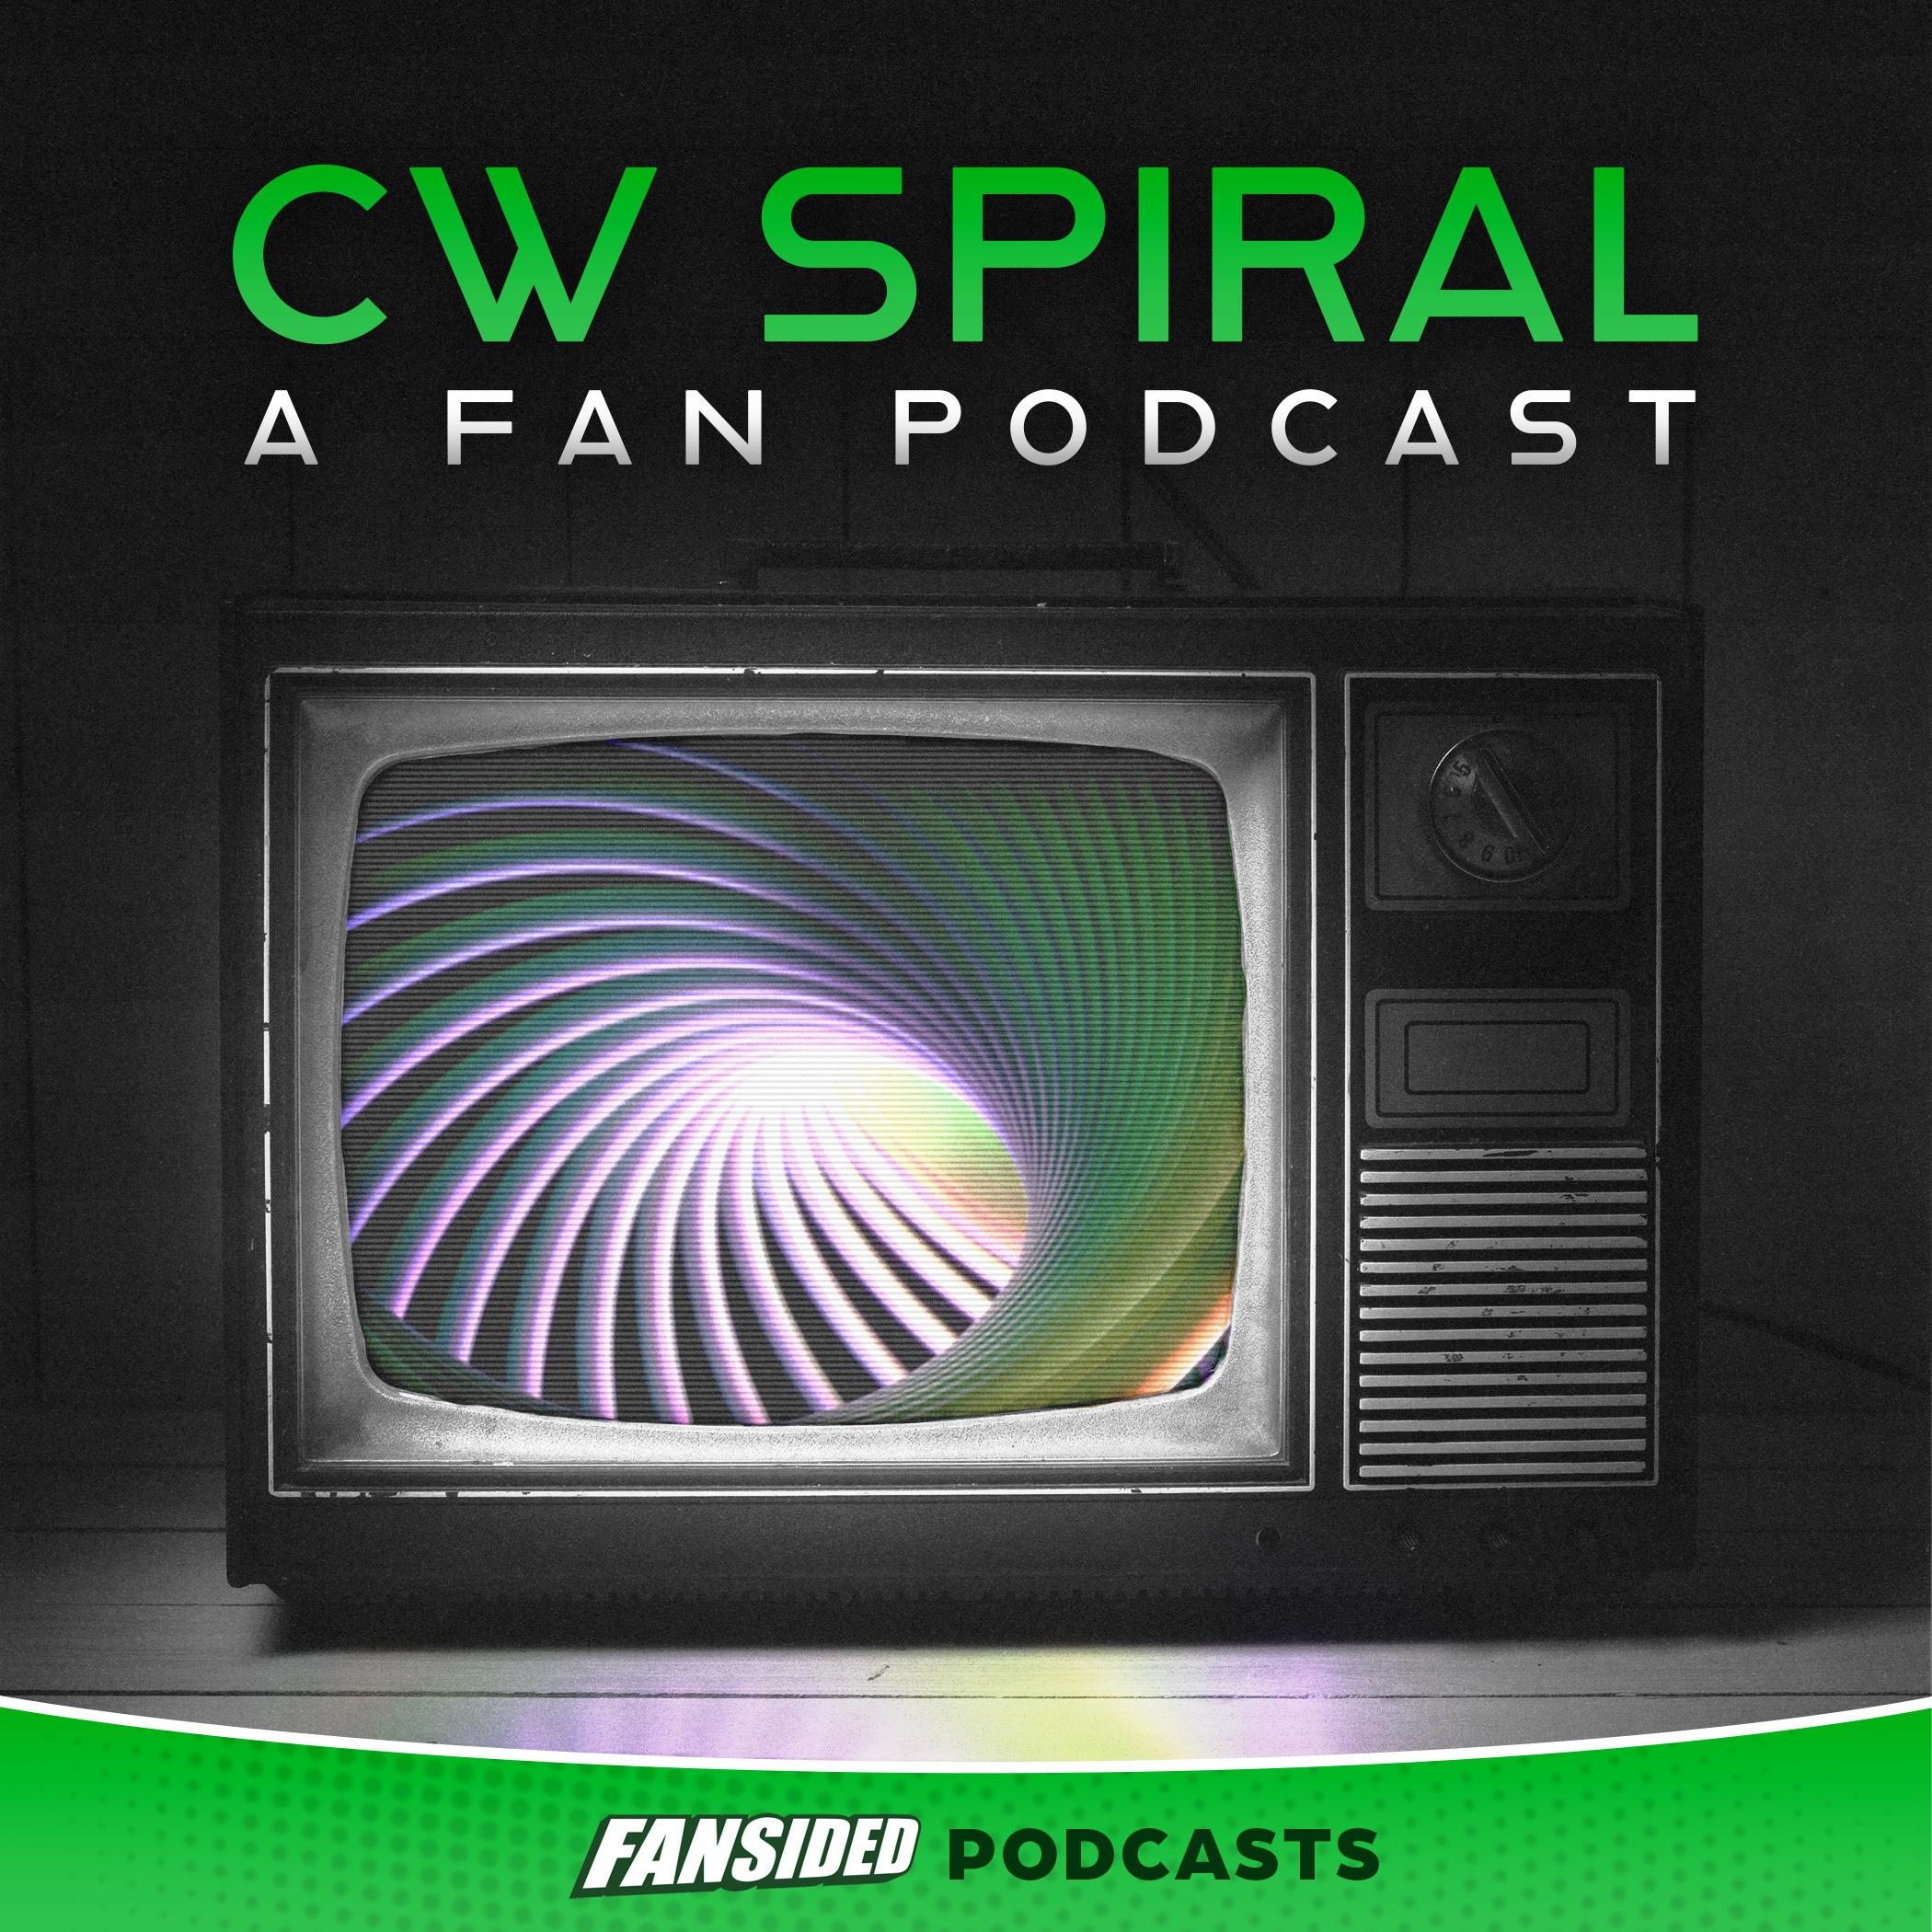 The CW Spiral